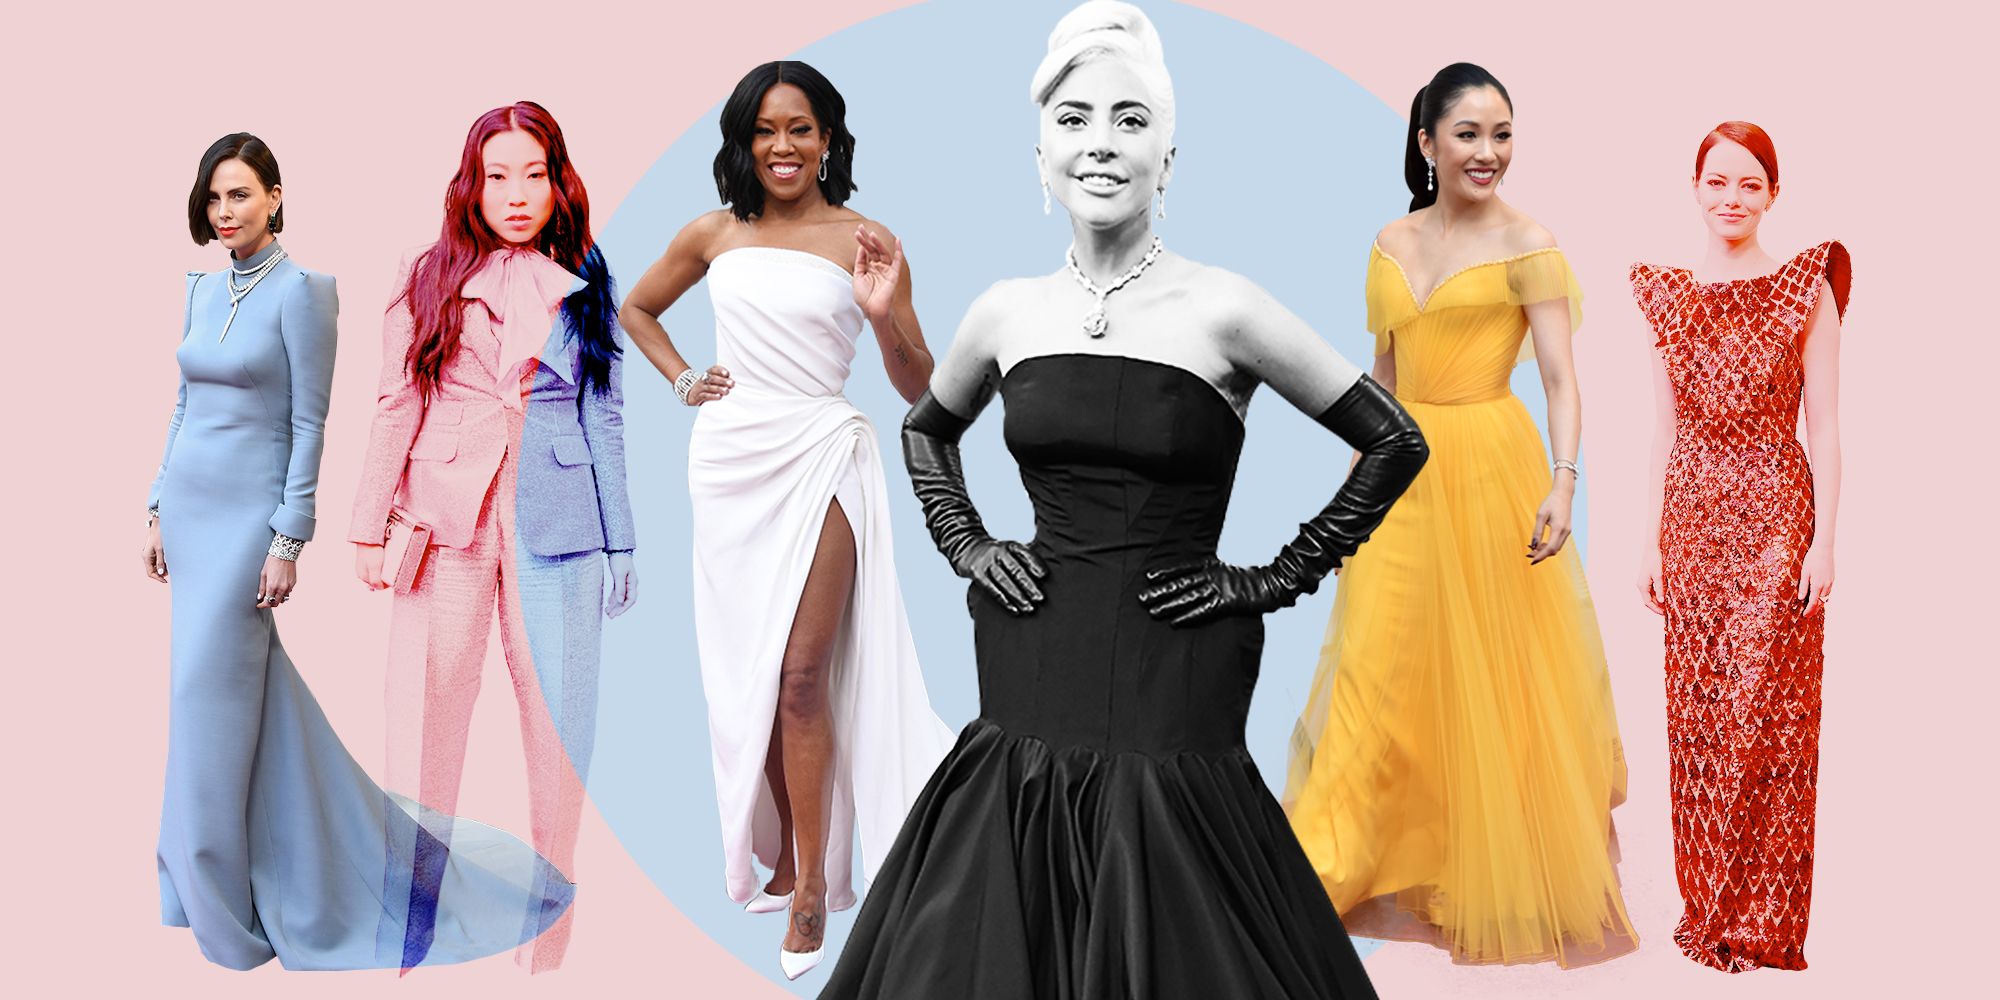 NFL Draft 2019: The best dressed and most unusual looks from the red carpet  